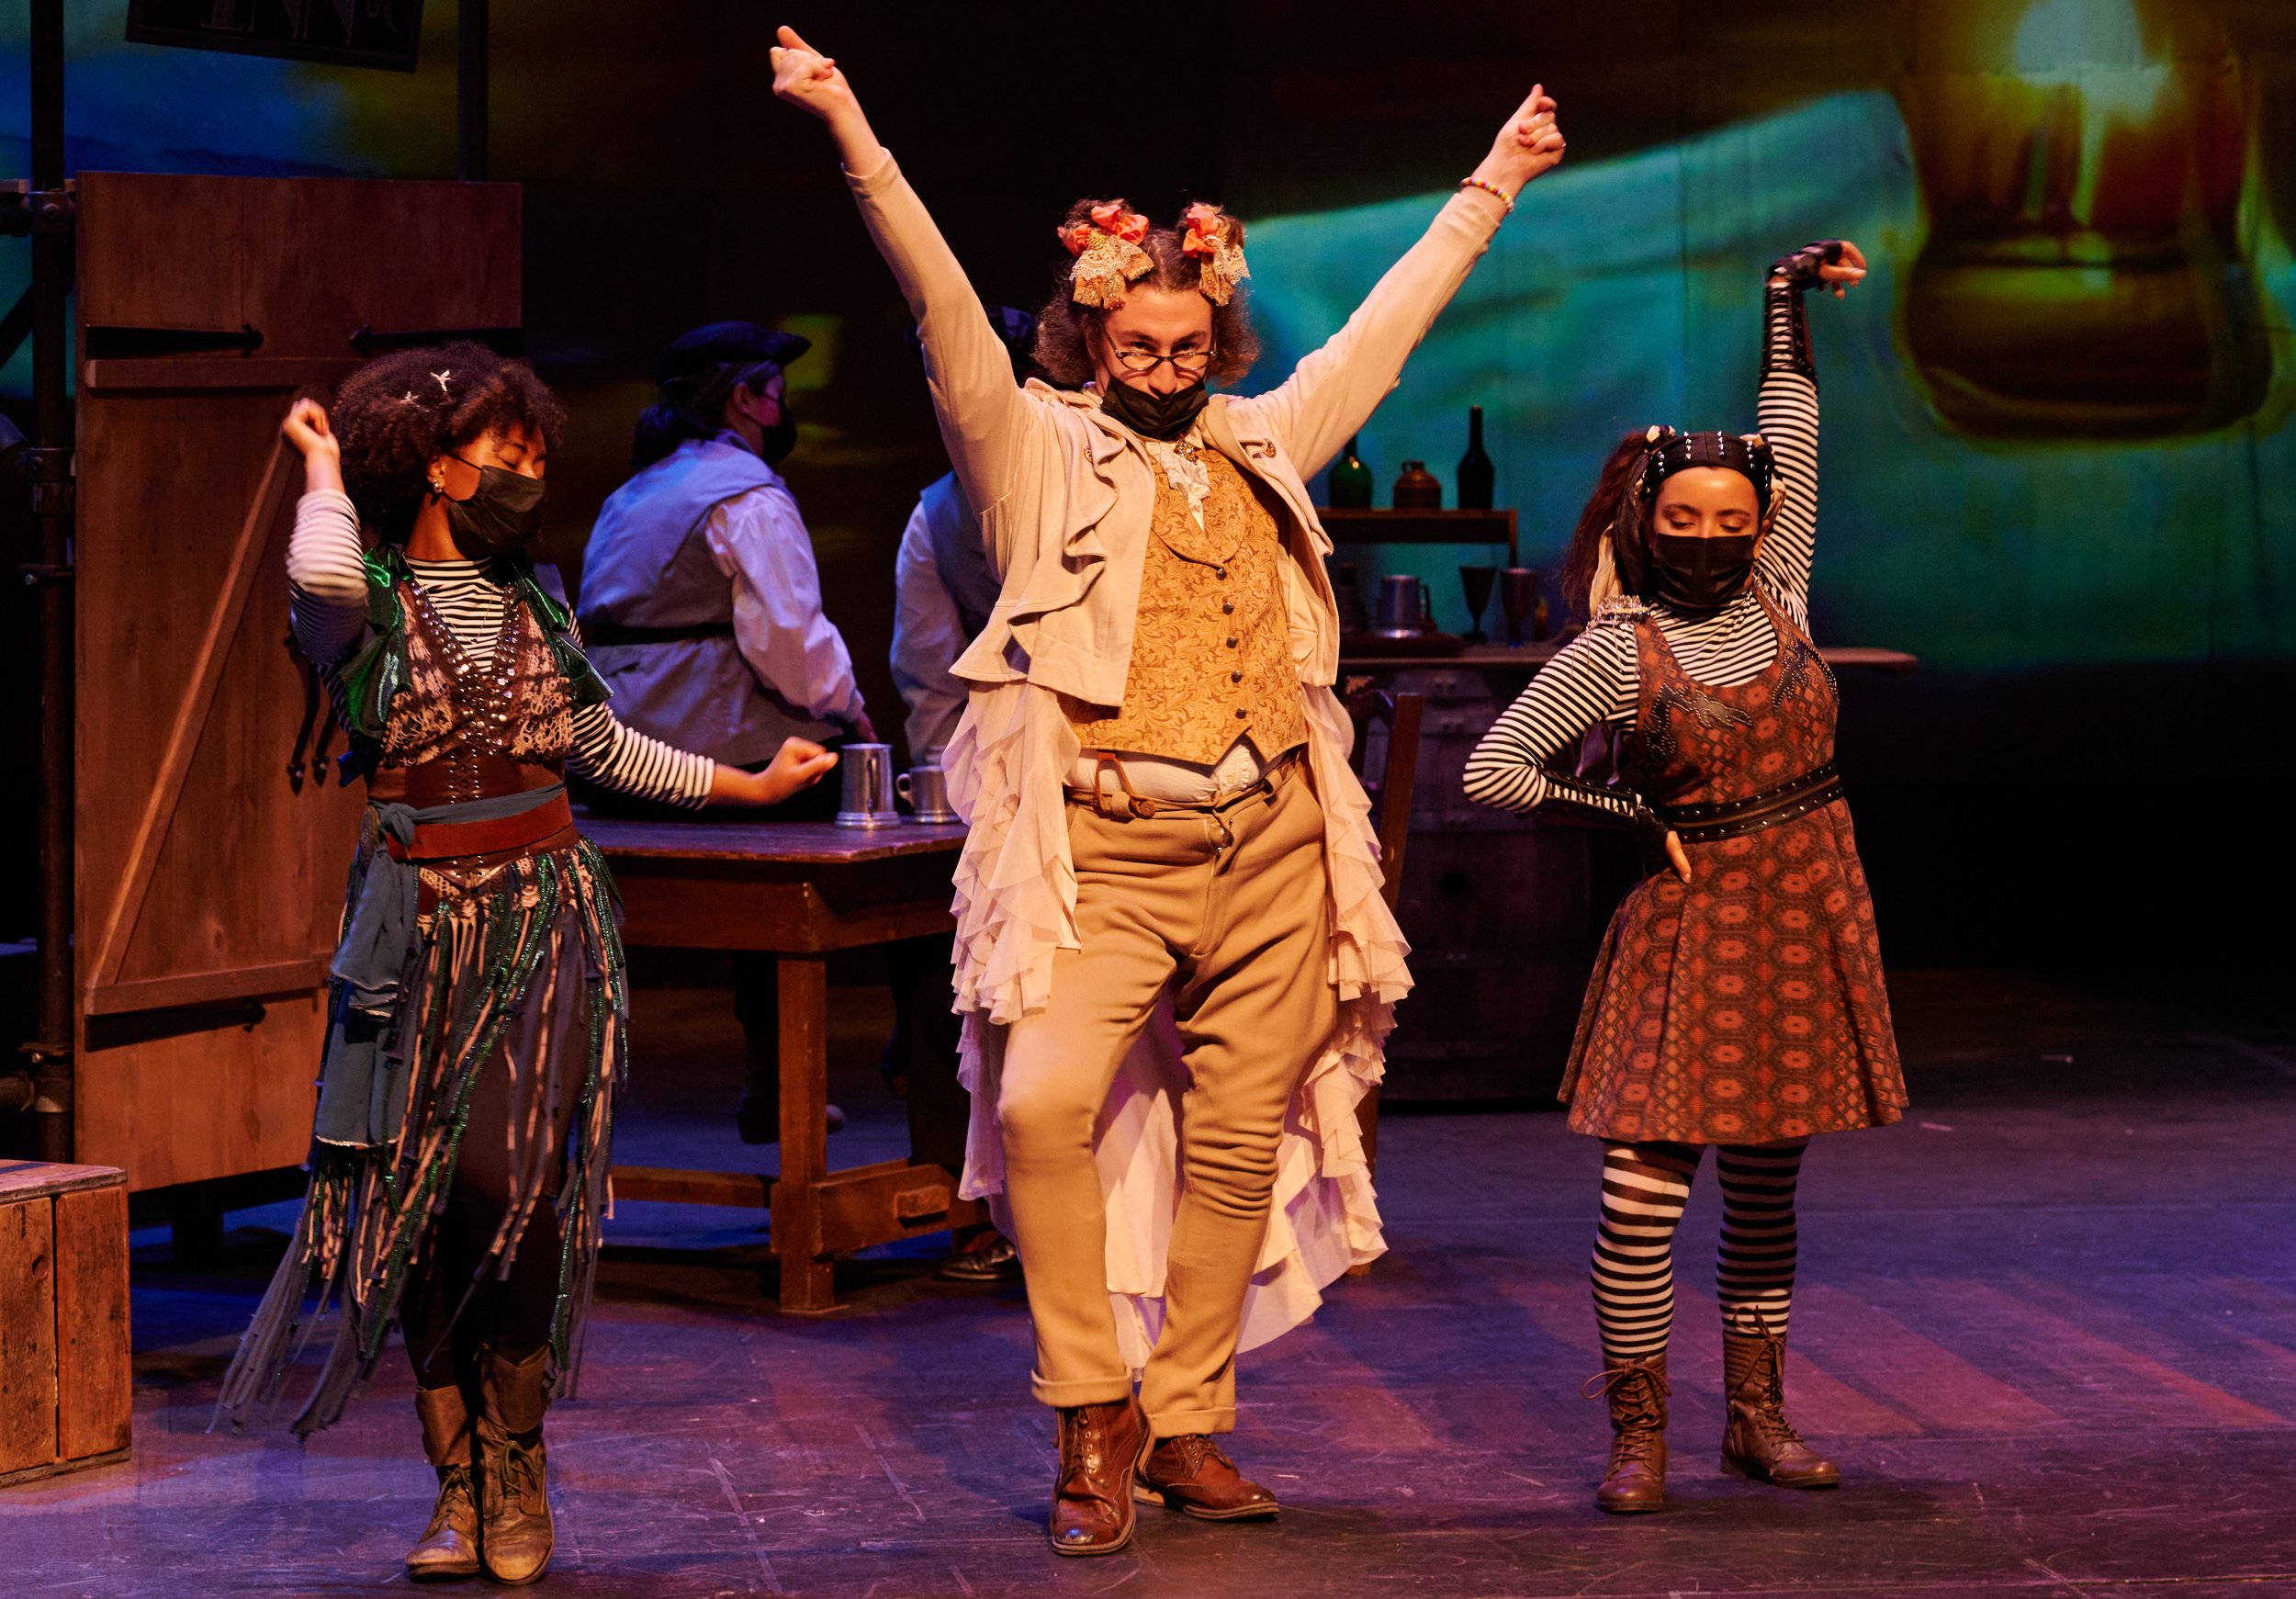  Charity Reid, Jordi Kligman, and Katrina Waight during rehearsal of the Santa Monica College Theatre Arts production of "Treasure Island" at the SMC Main Stage on Tuesday, May 17, 2022, in Santa Monica, Calif. (Nicholas McCall | The Corsair) 